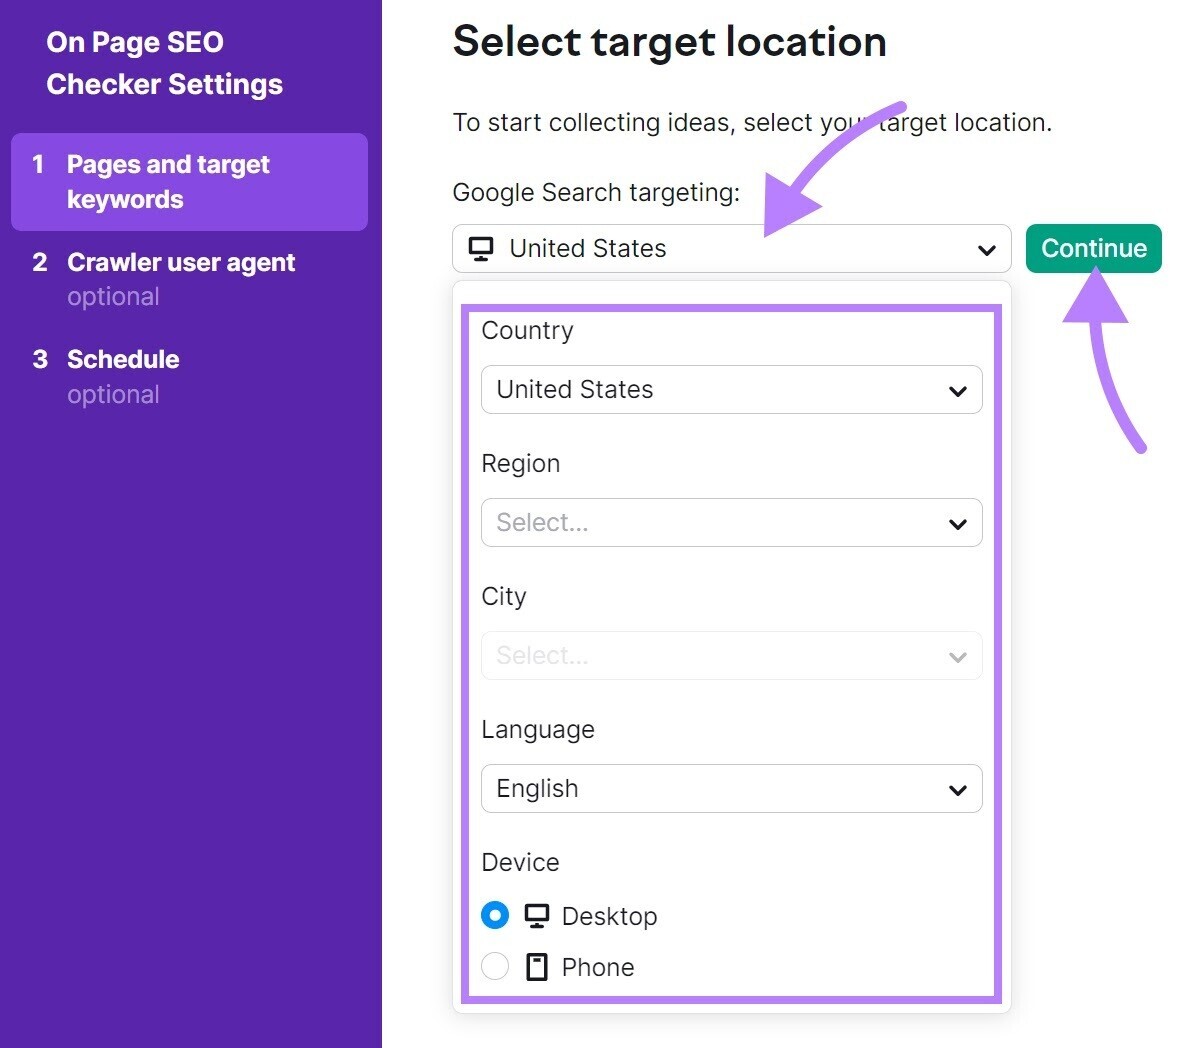 "Select target location" window in On Page SEO Checker Settings